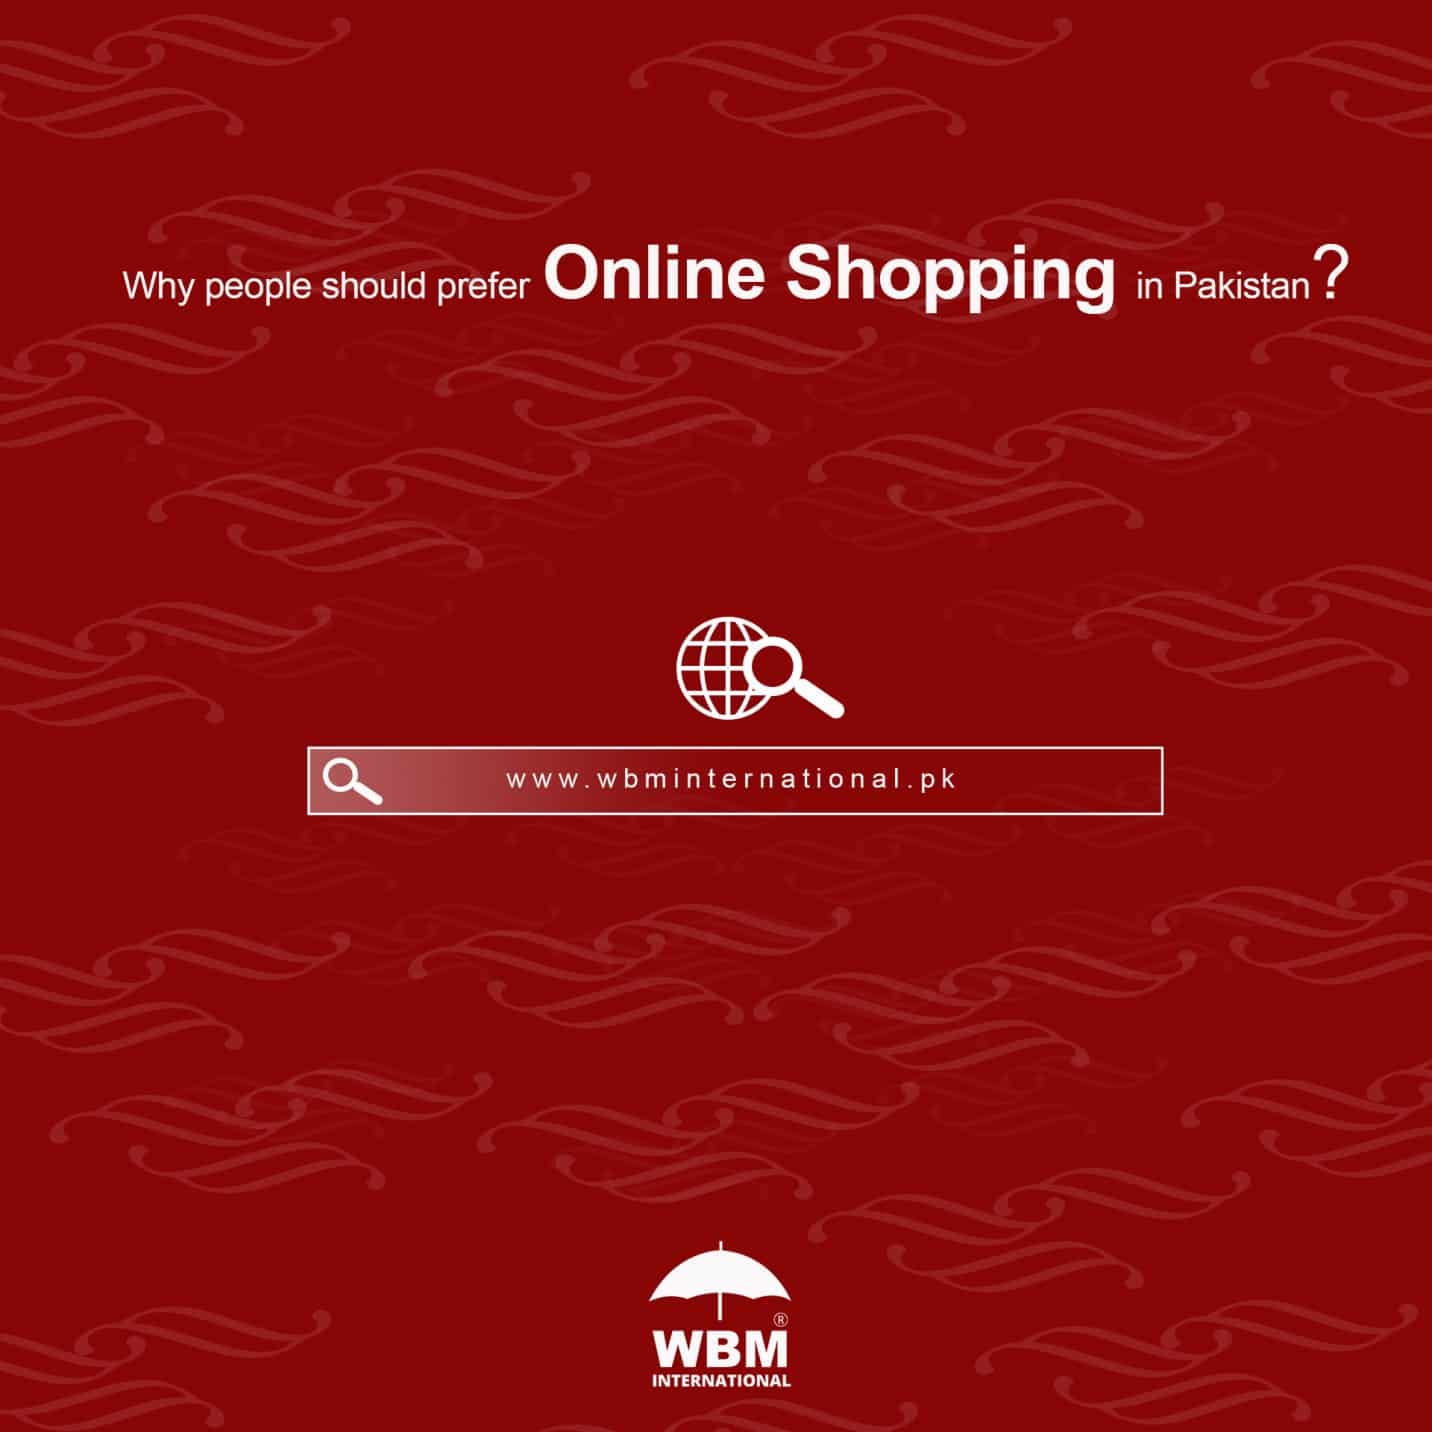 Why People should prefer online Shopping in Pakistan?